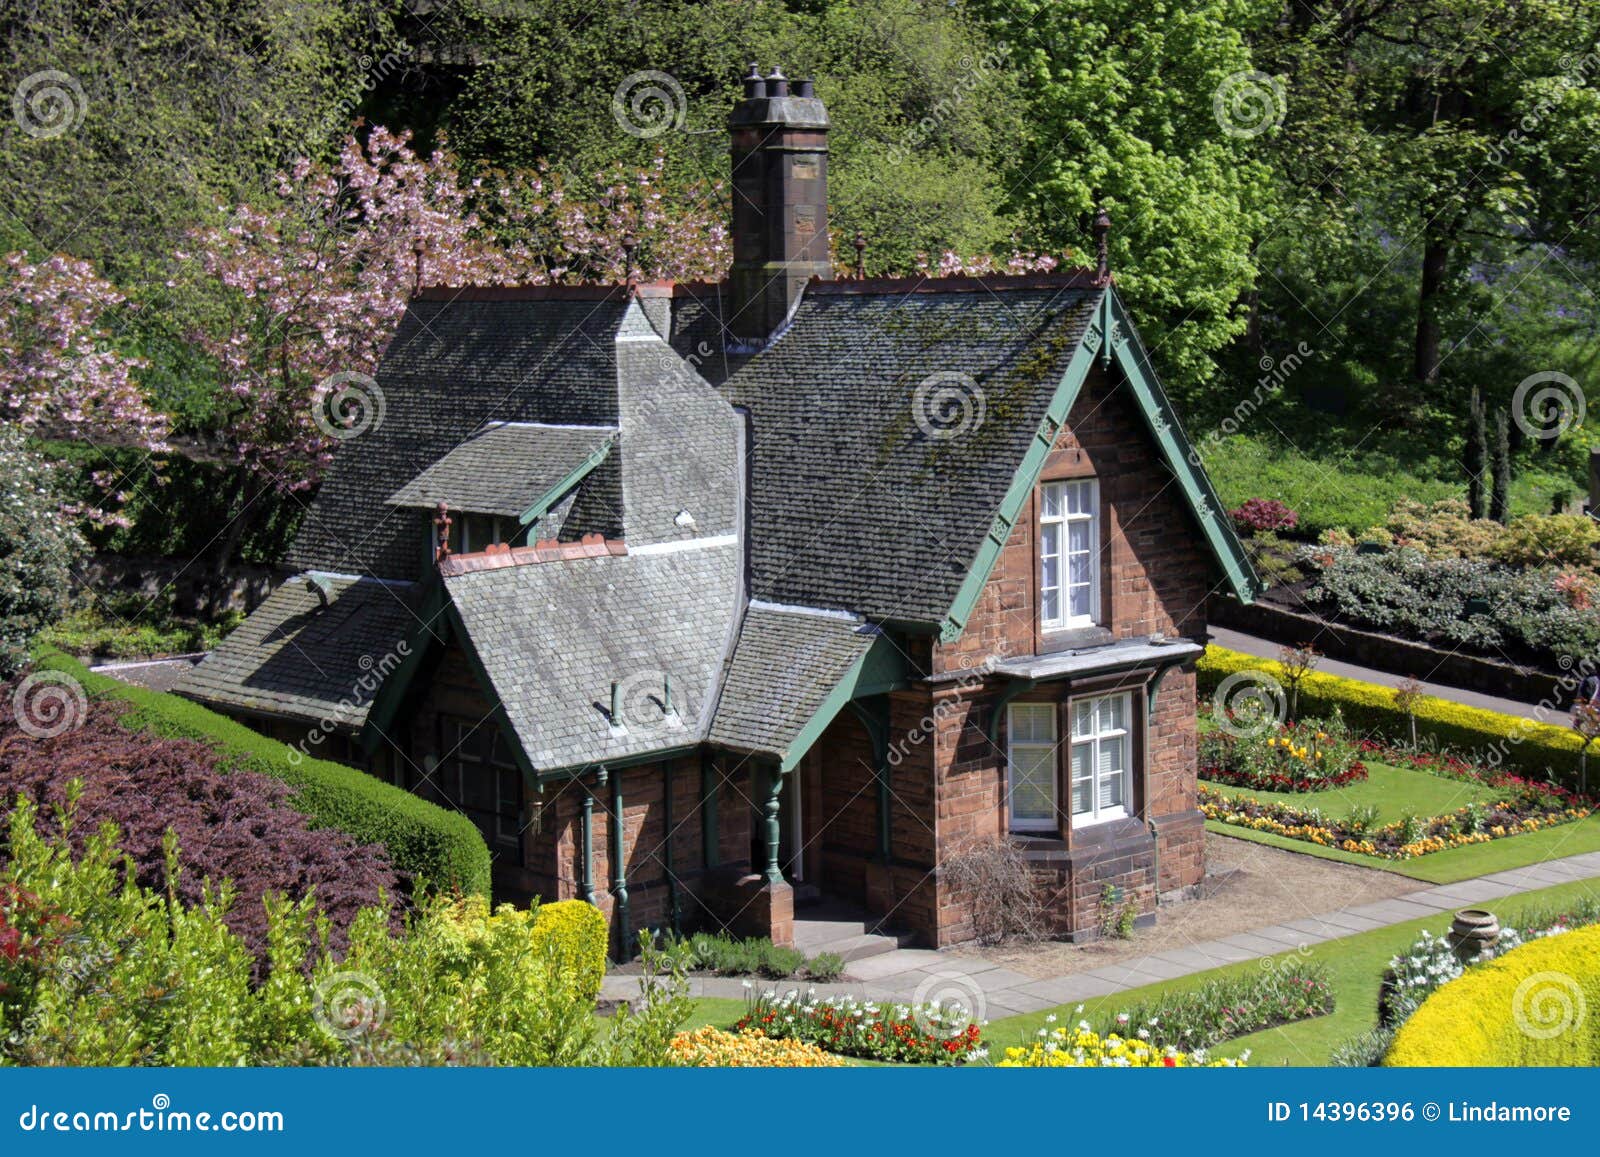 quaint old cottage in princes street gardens